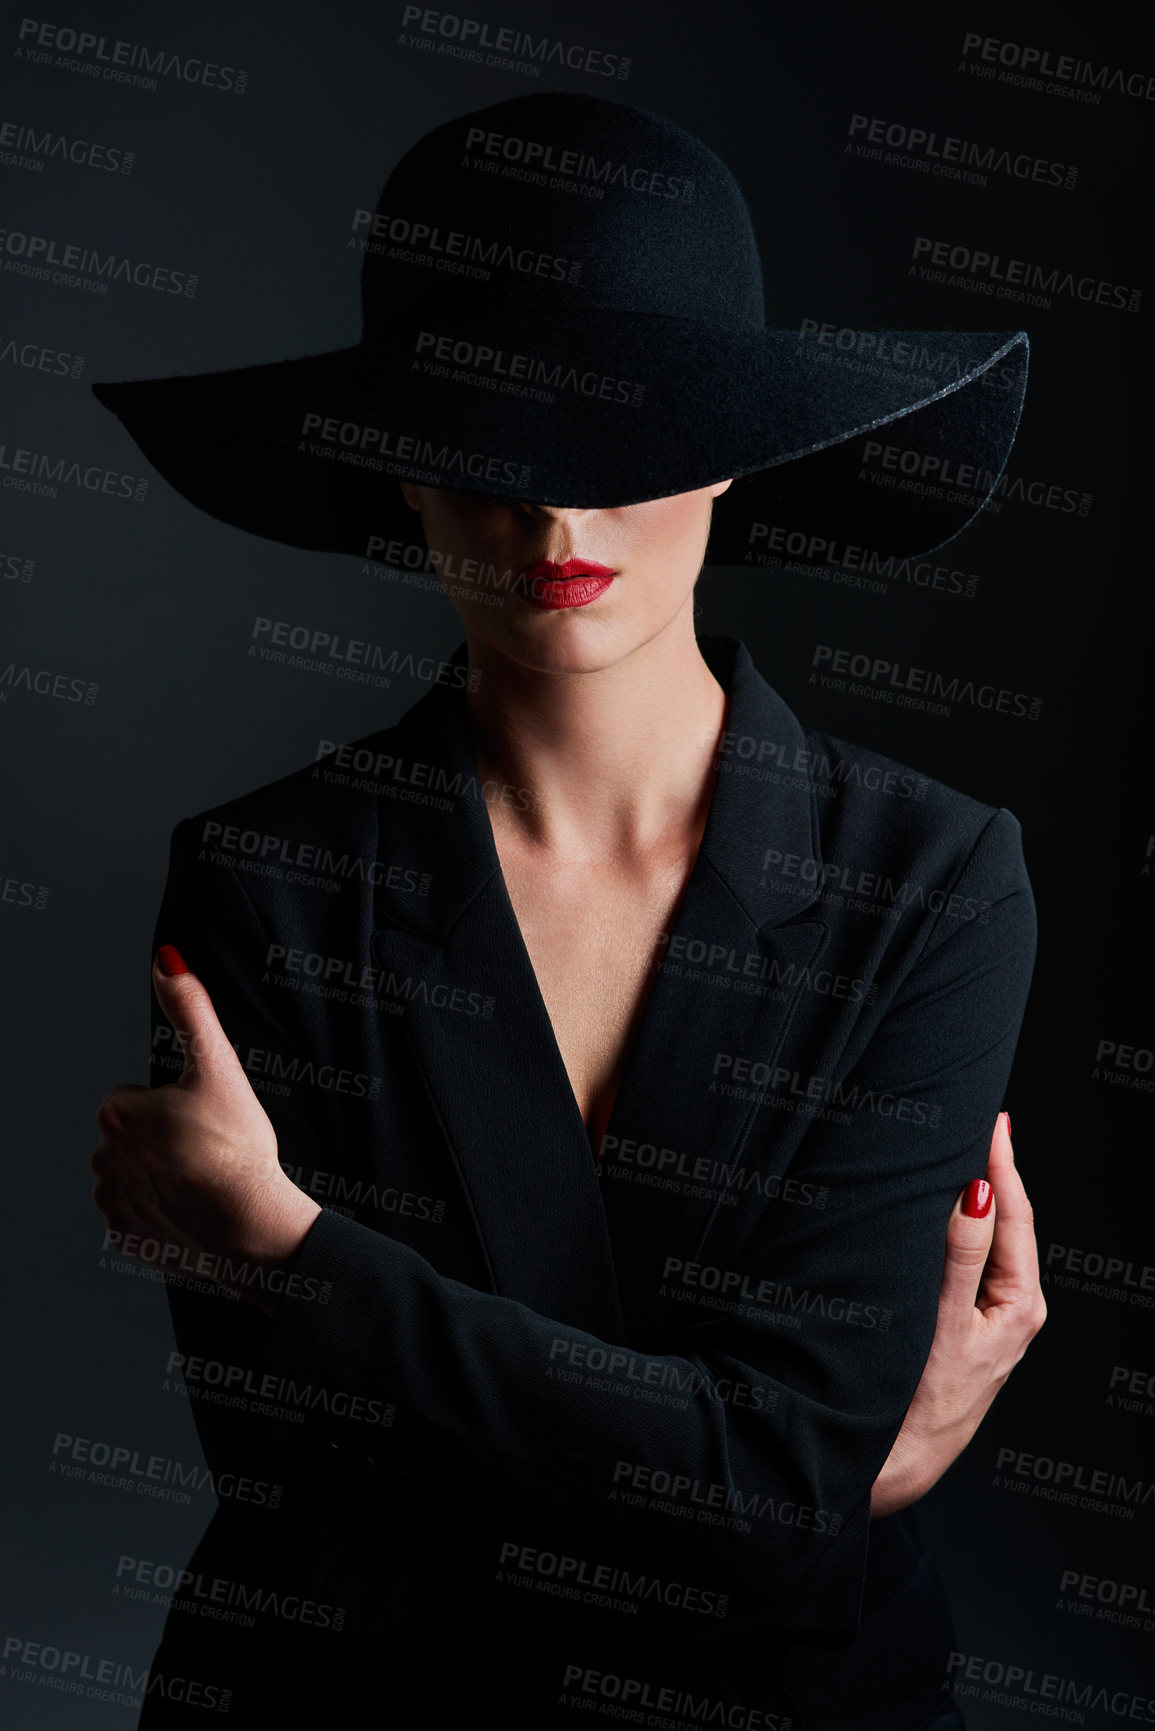 Buy stock photo Studio shot of a beautiful mature woman wearing a hat and posing against a dark background